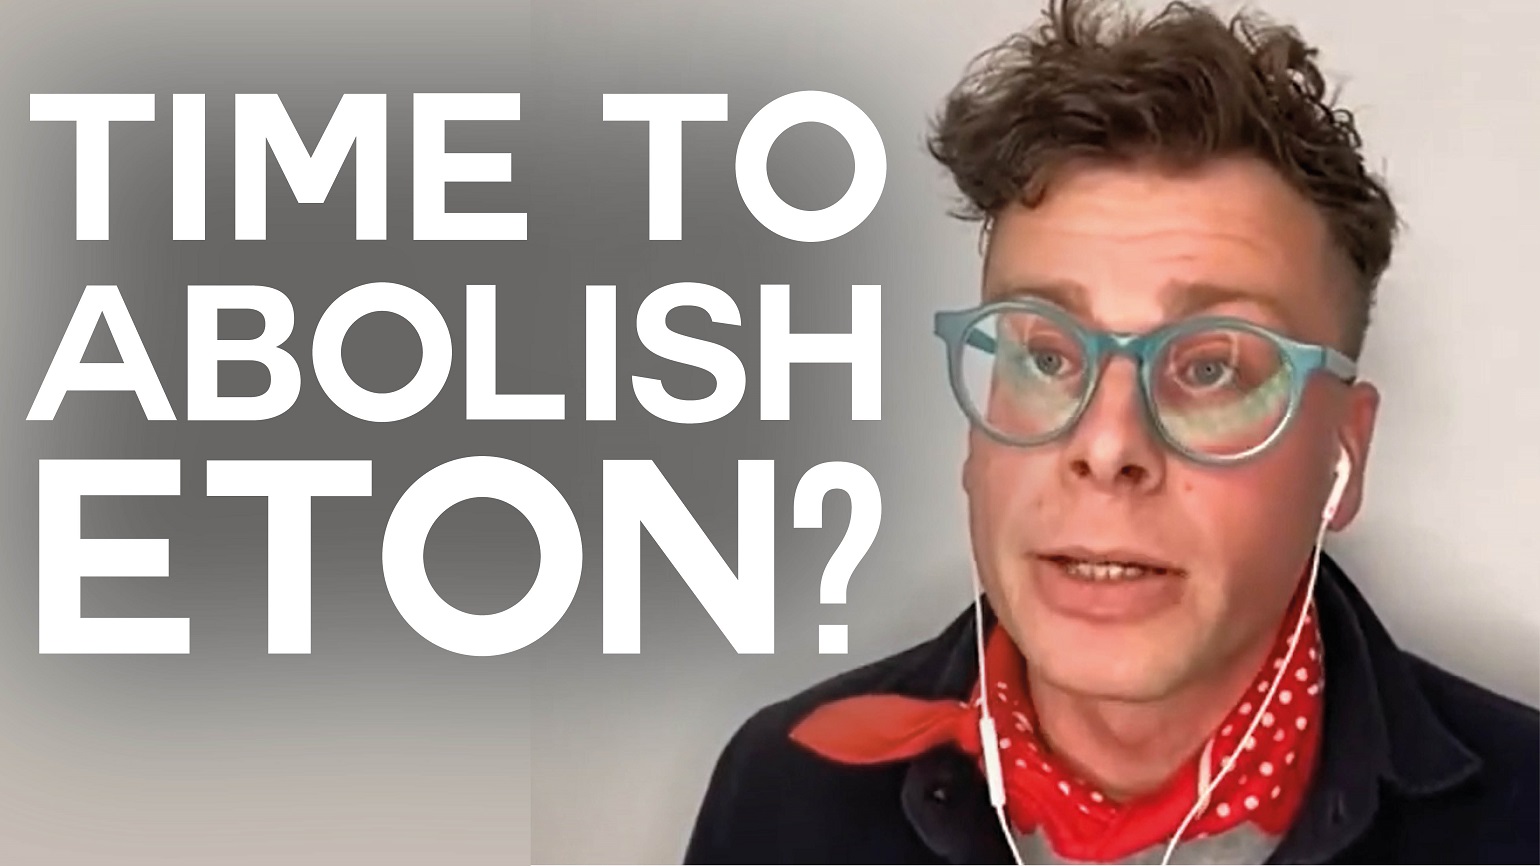 A still from an interview with Paul Turner with text overlaid reading "Time to Abolish Eton?"